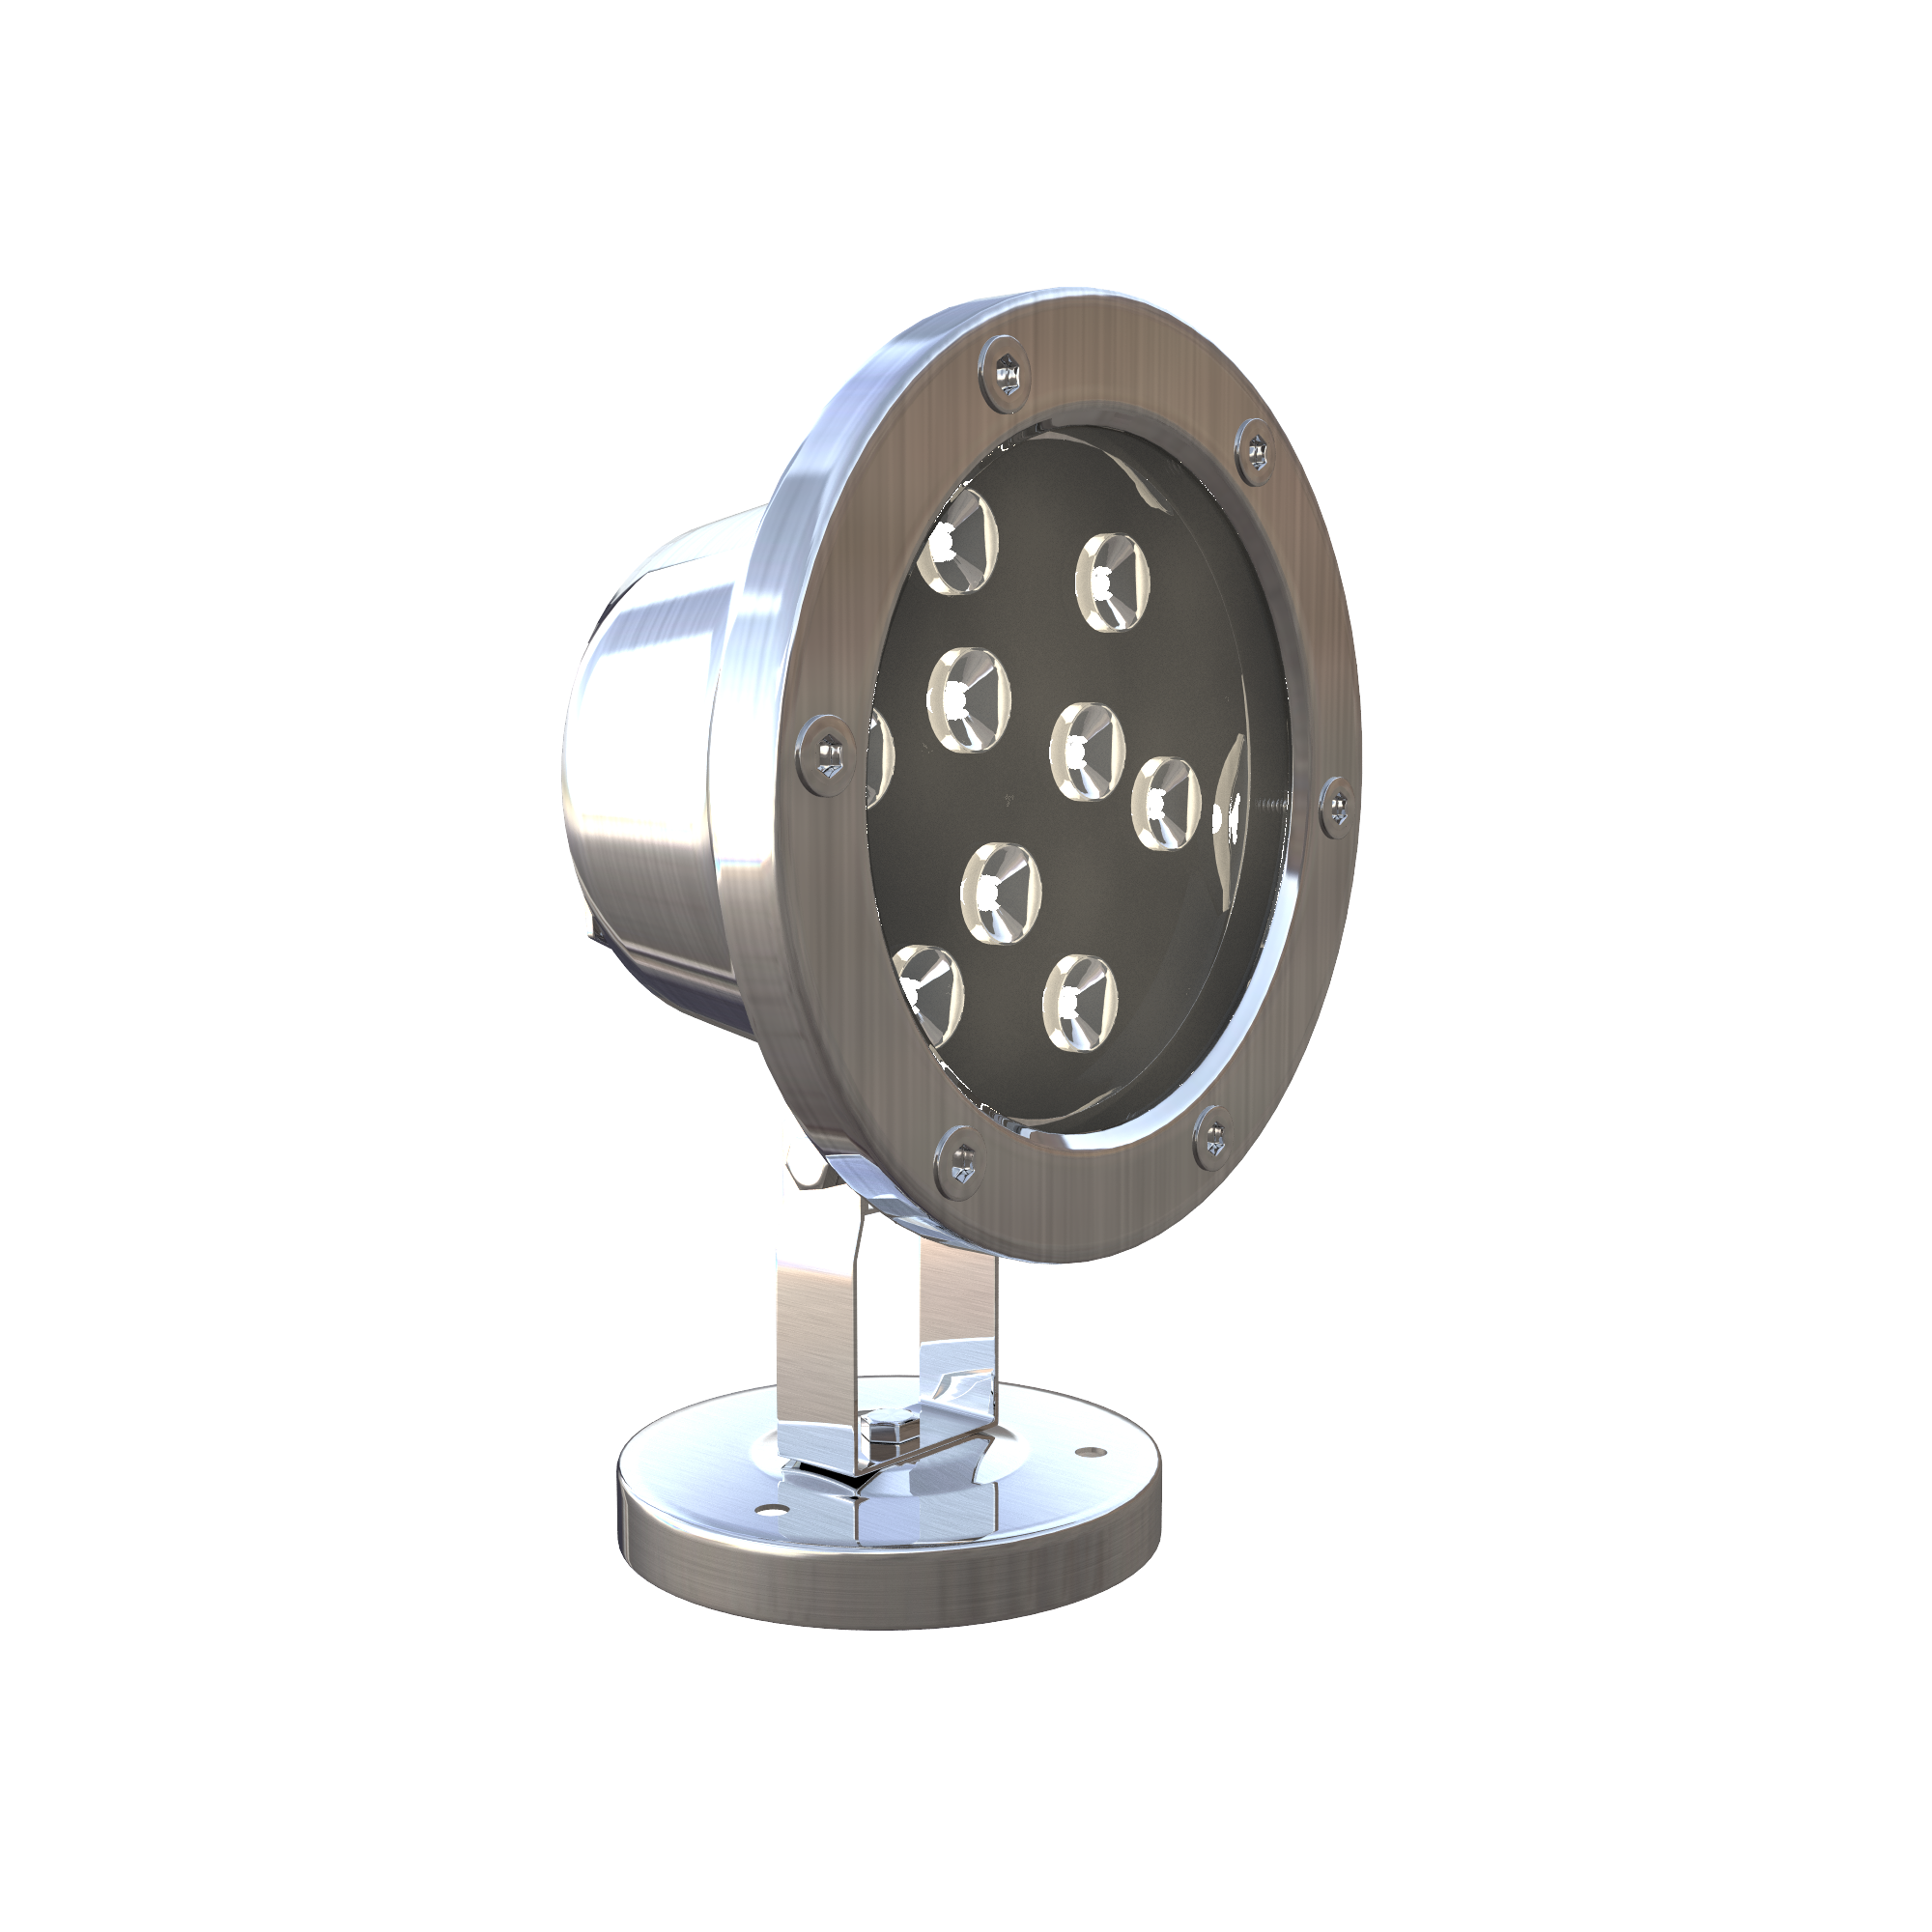 Photo of Stainless Steel LED Spot Lights - Marquis Gardens